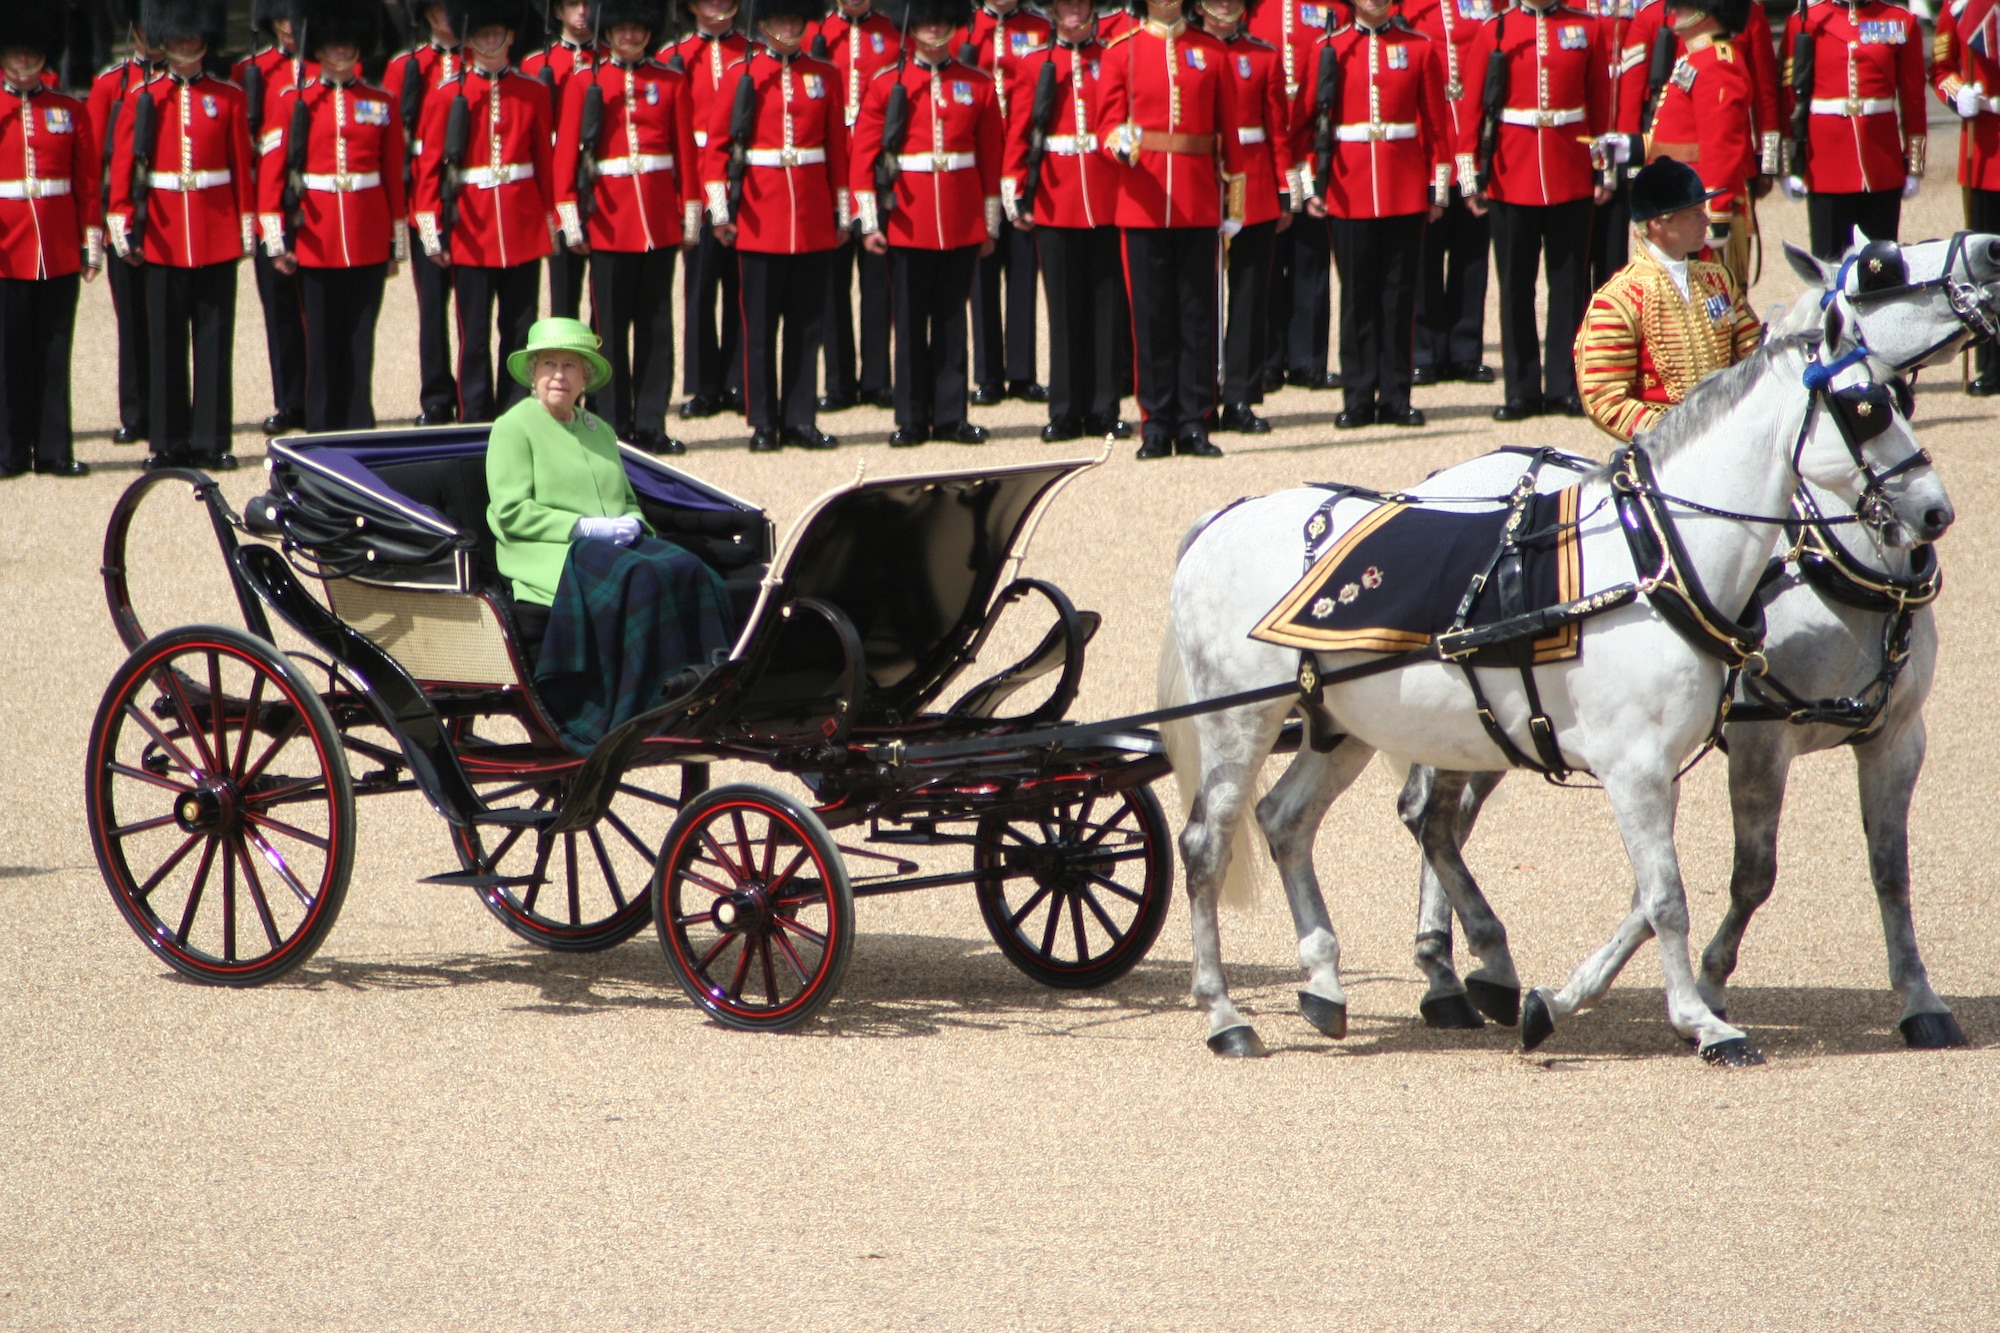 The Queen inspects her Guards in Queen Victoria's ivory-mounted phaeton of 1842. (courtesy photo)